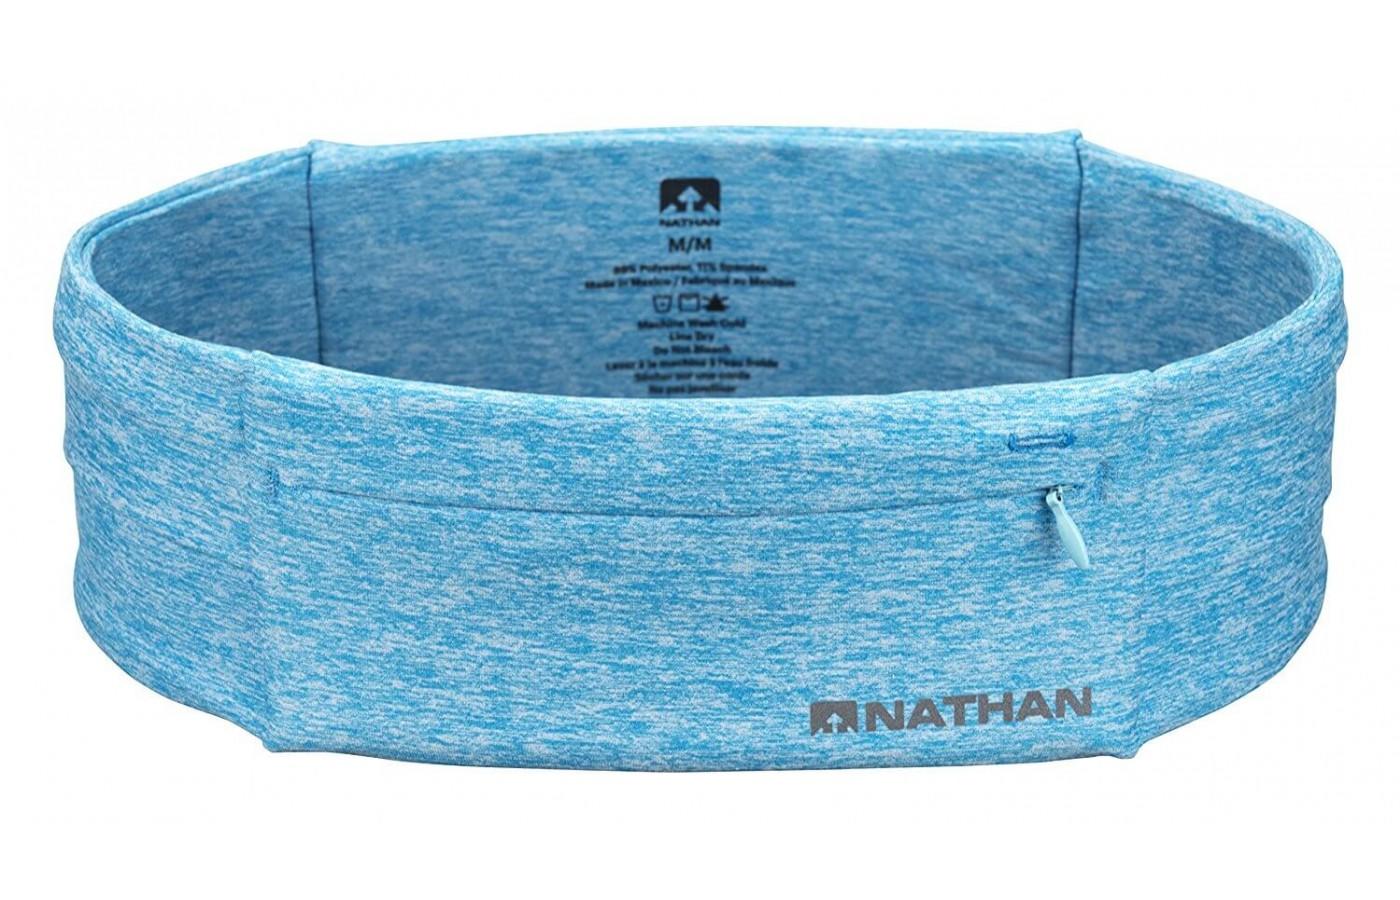 The Nathan Zipster Belt comes in three colors